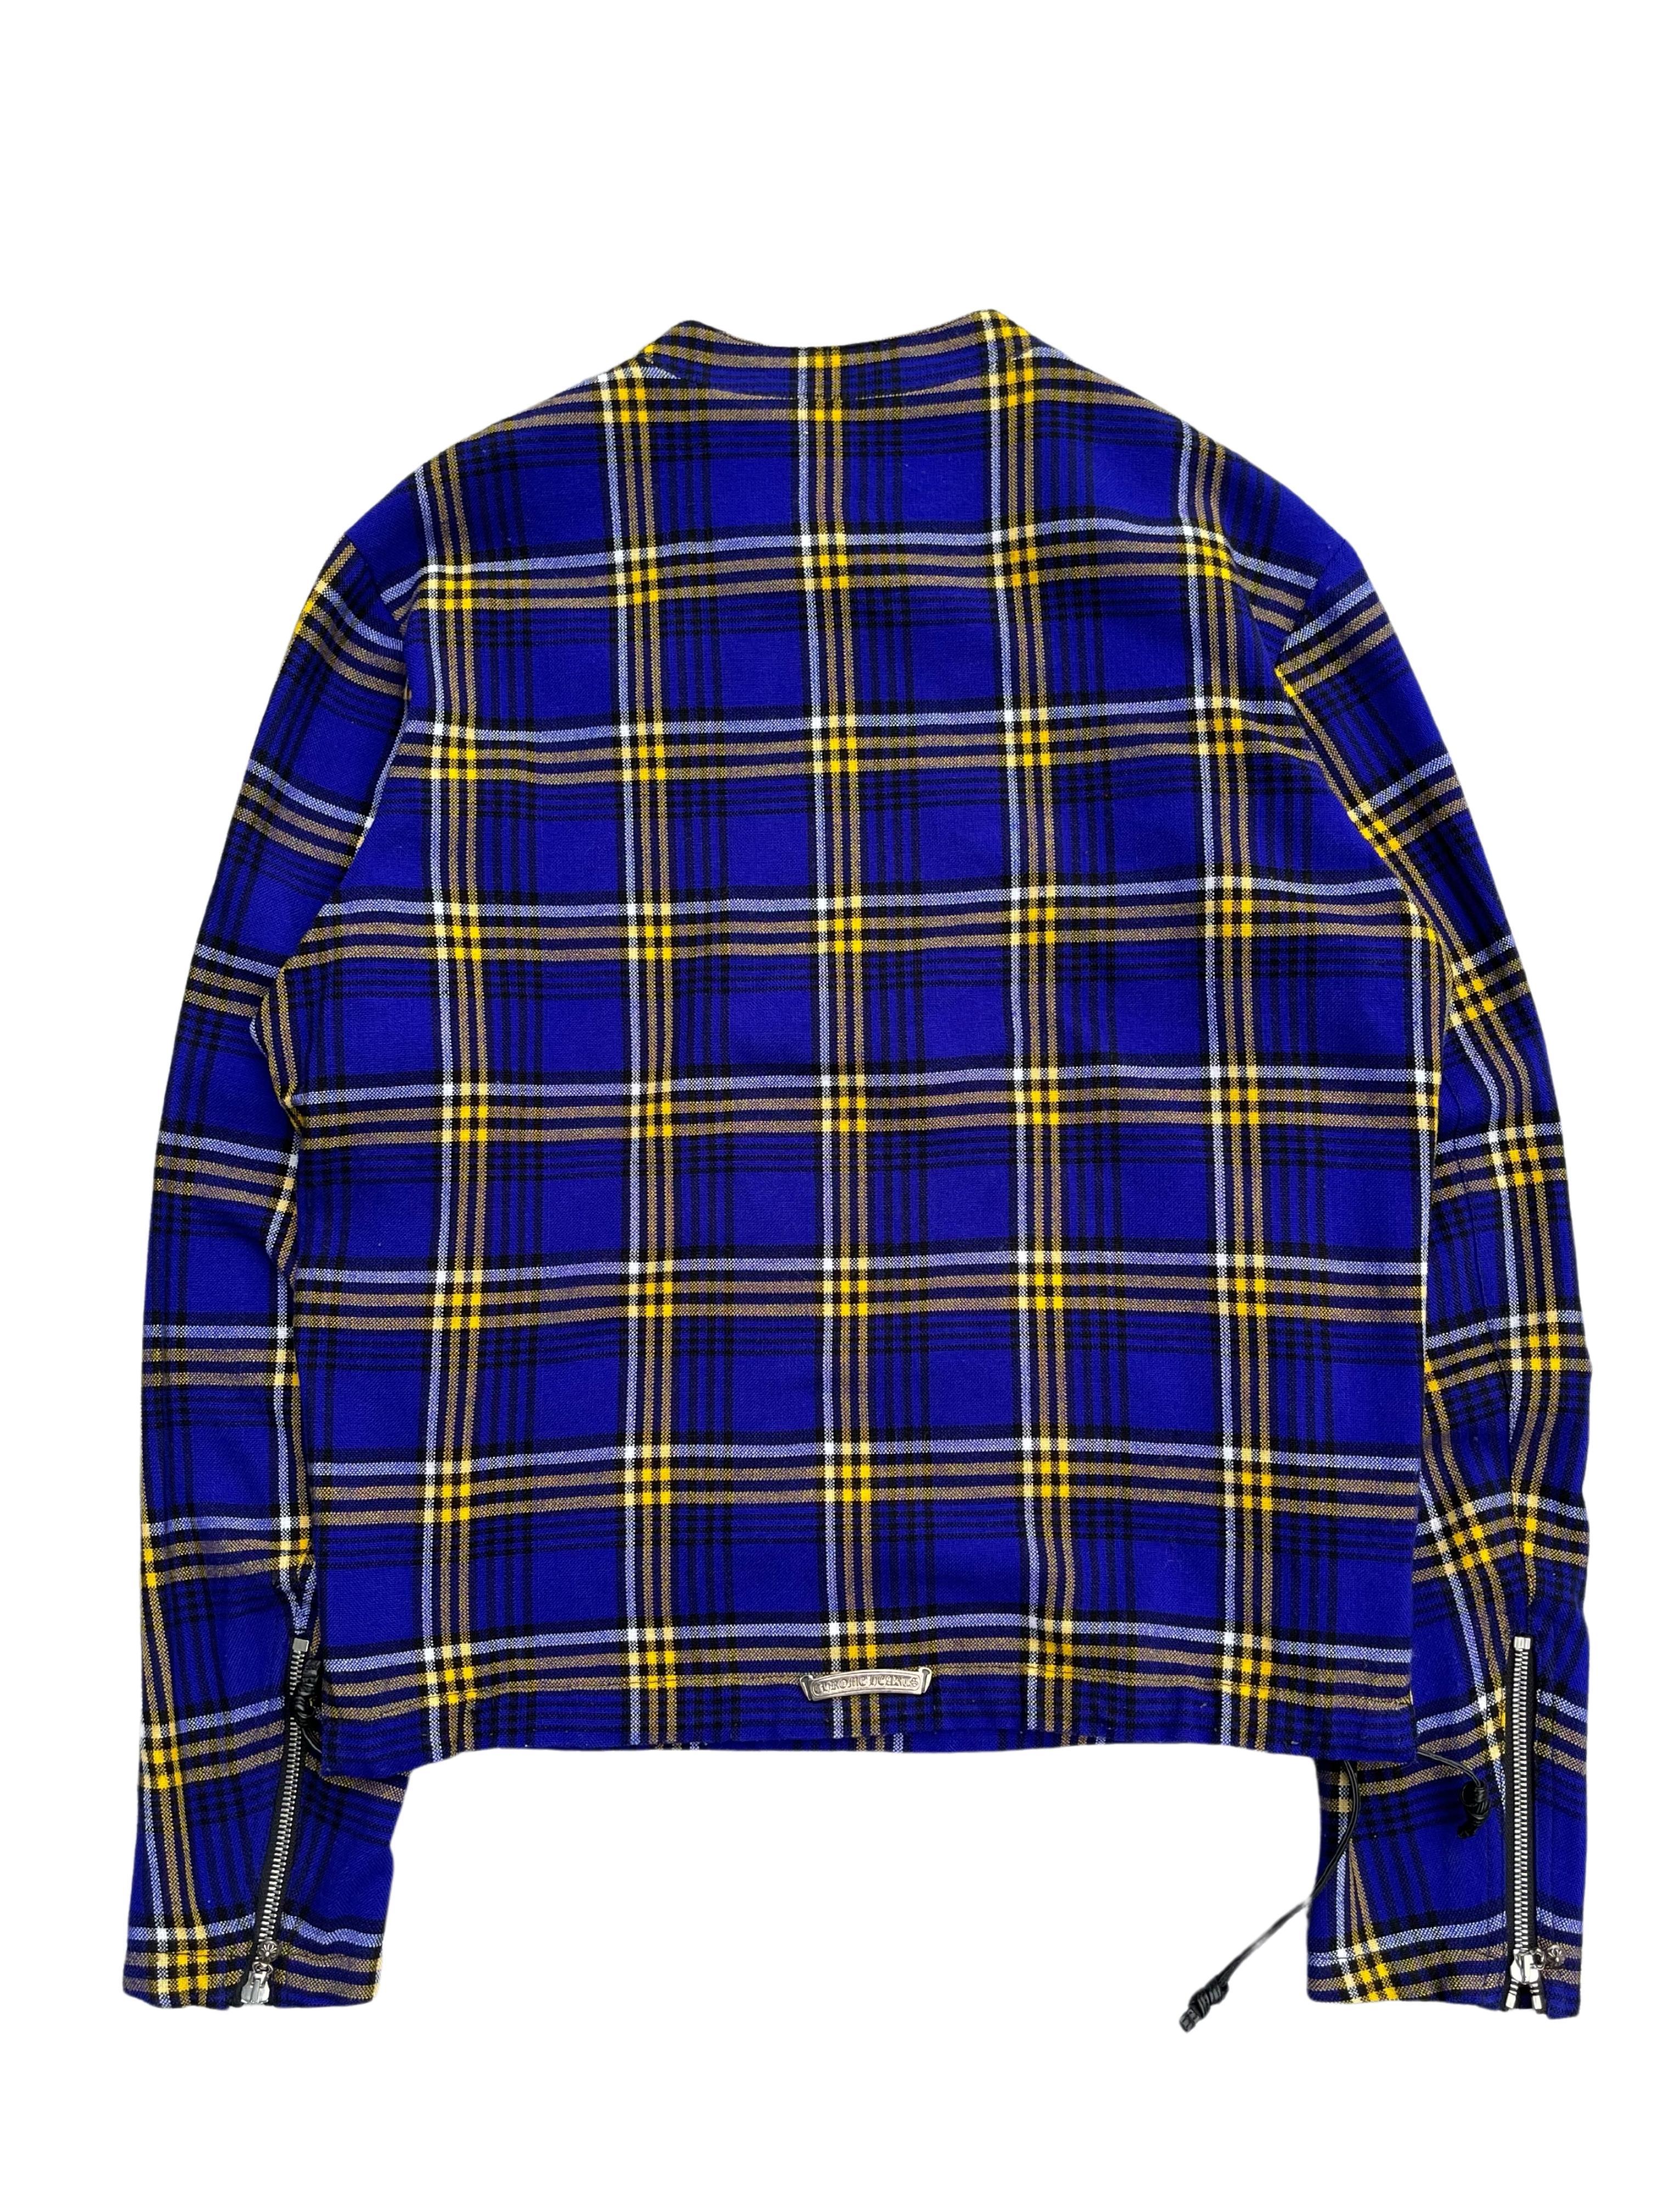 Chrome Hearts Checkered Pullover Shirt, 2008 For Sale 1